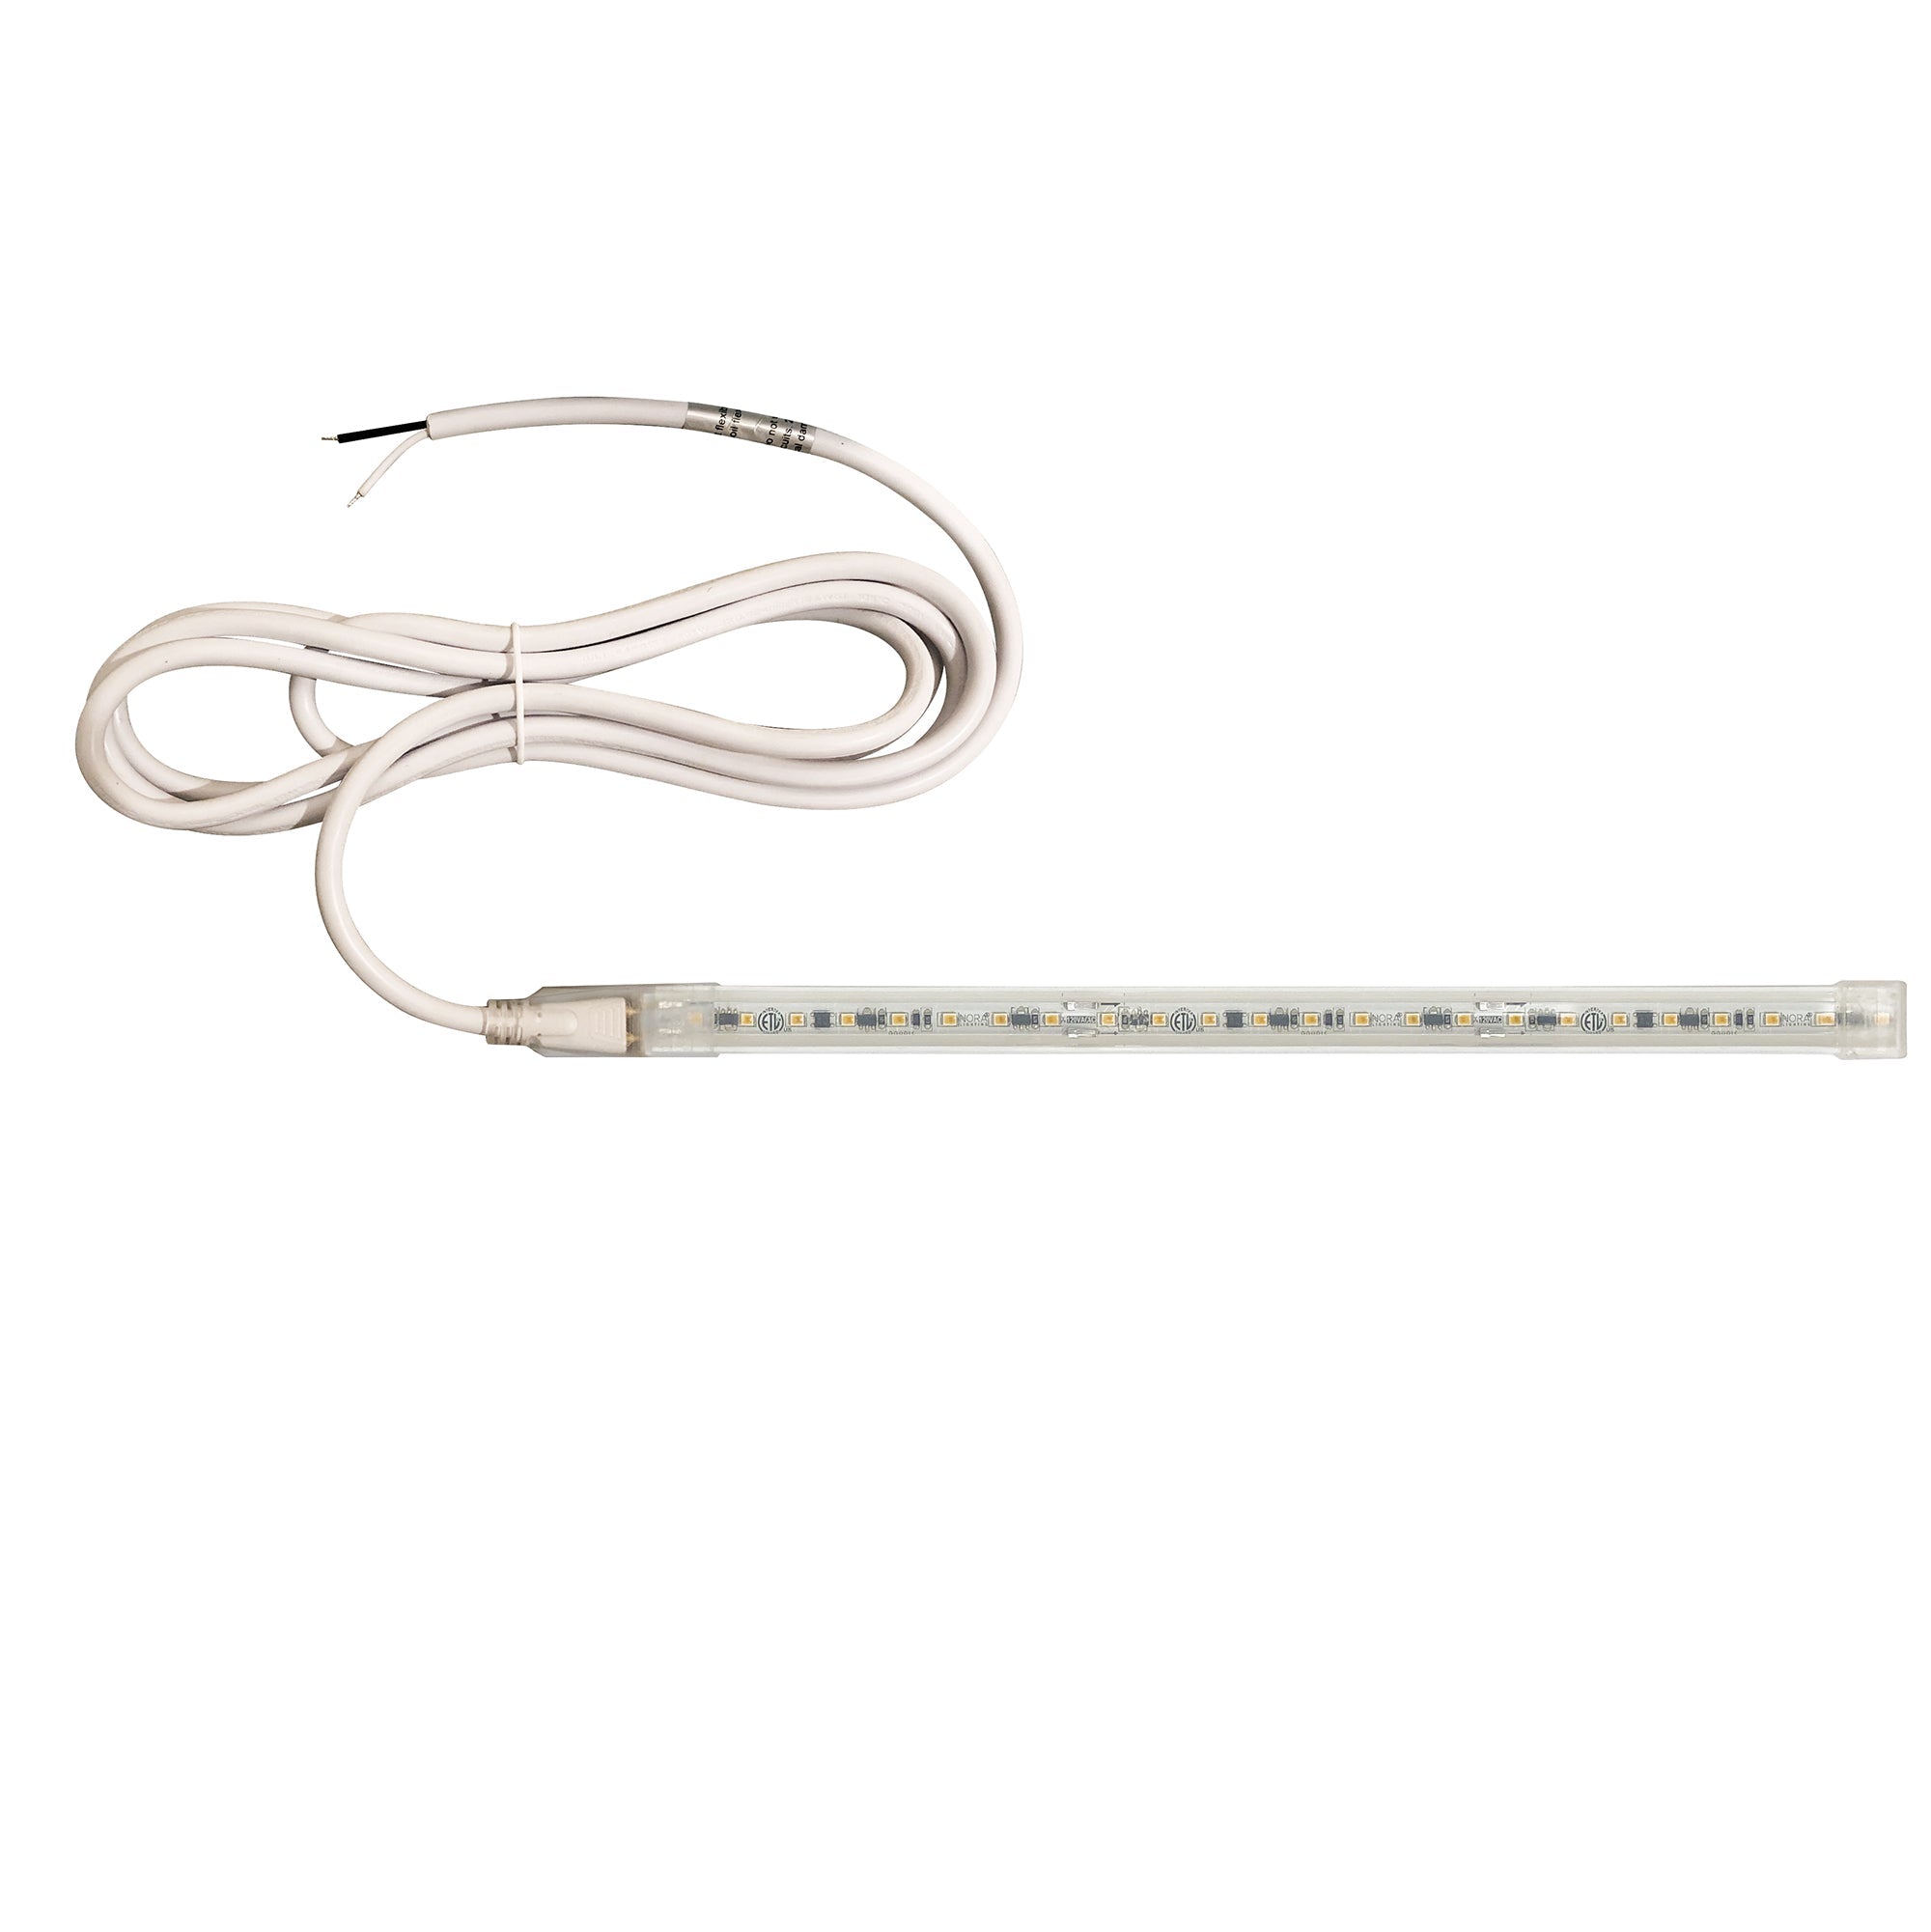 Nora Lighting NUTP13-W79-12-940/HW - Accent / Undercabinet - Custom Cut 79-ft 120V Continuous LED Tape Light, 330lm / 3.6W per foot, 4000K, w/ Mounting Clips and 8' Hardwired Power Cord